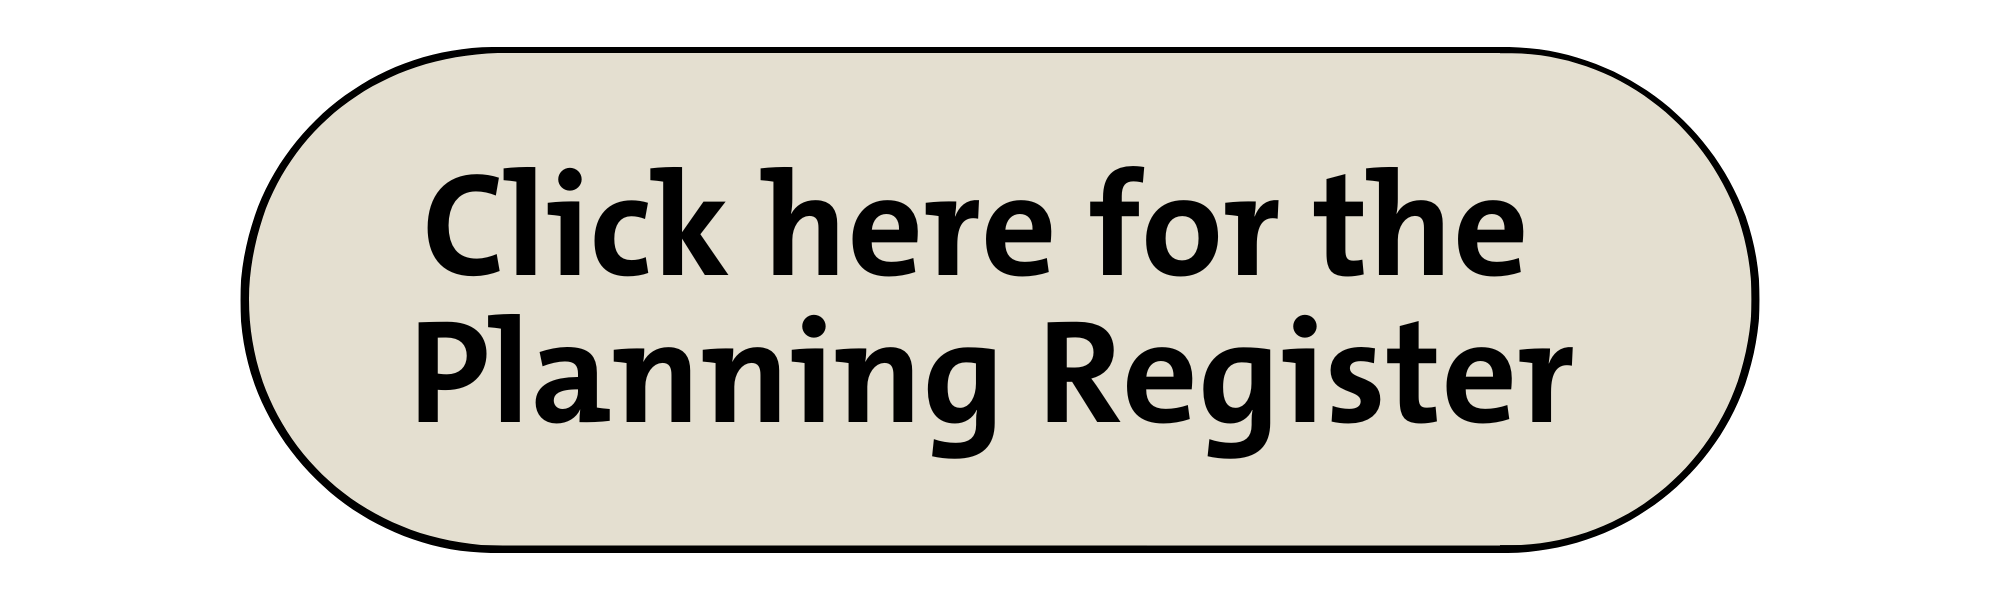 Planning-Register-button.png